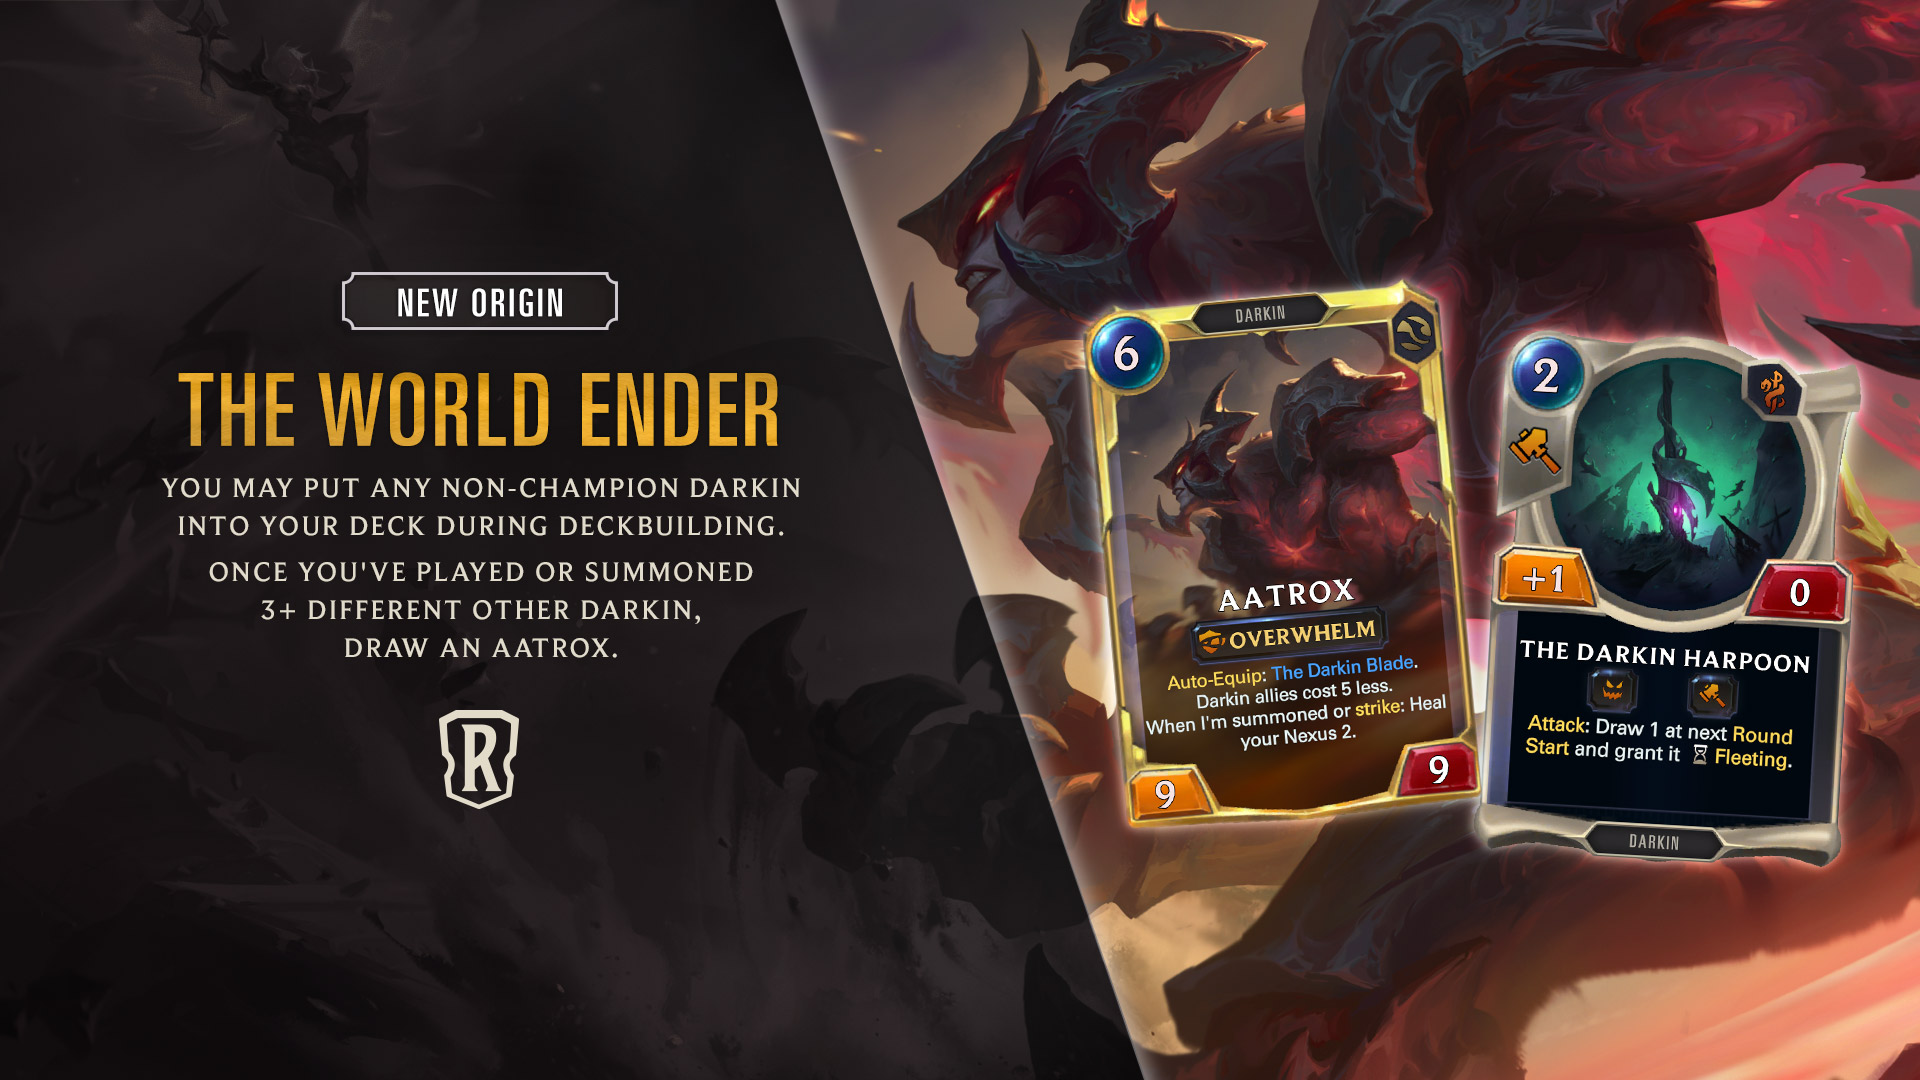 The new expansion is here: World Ender!